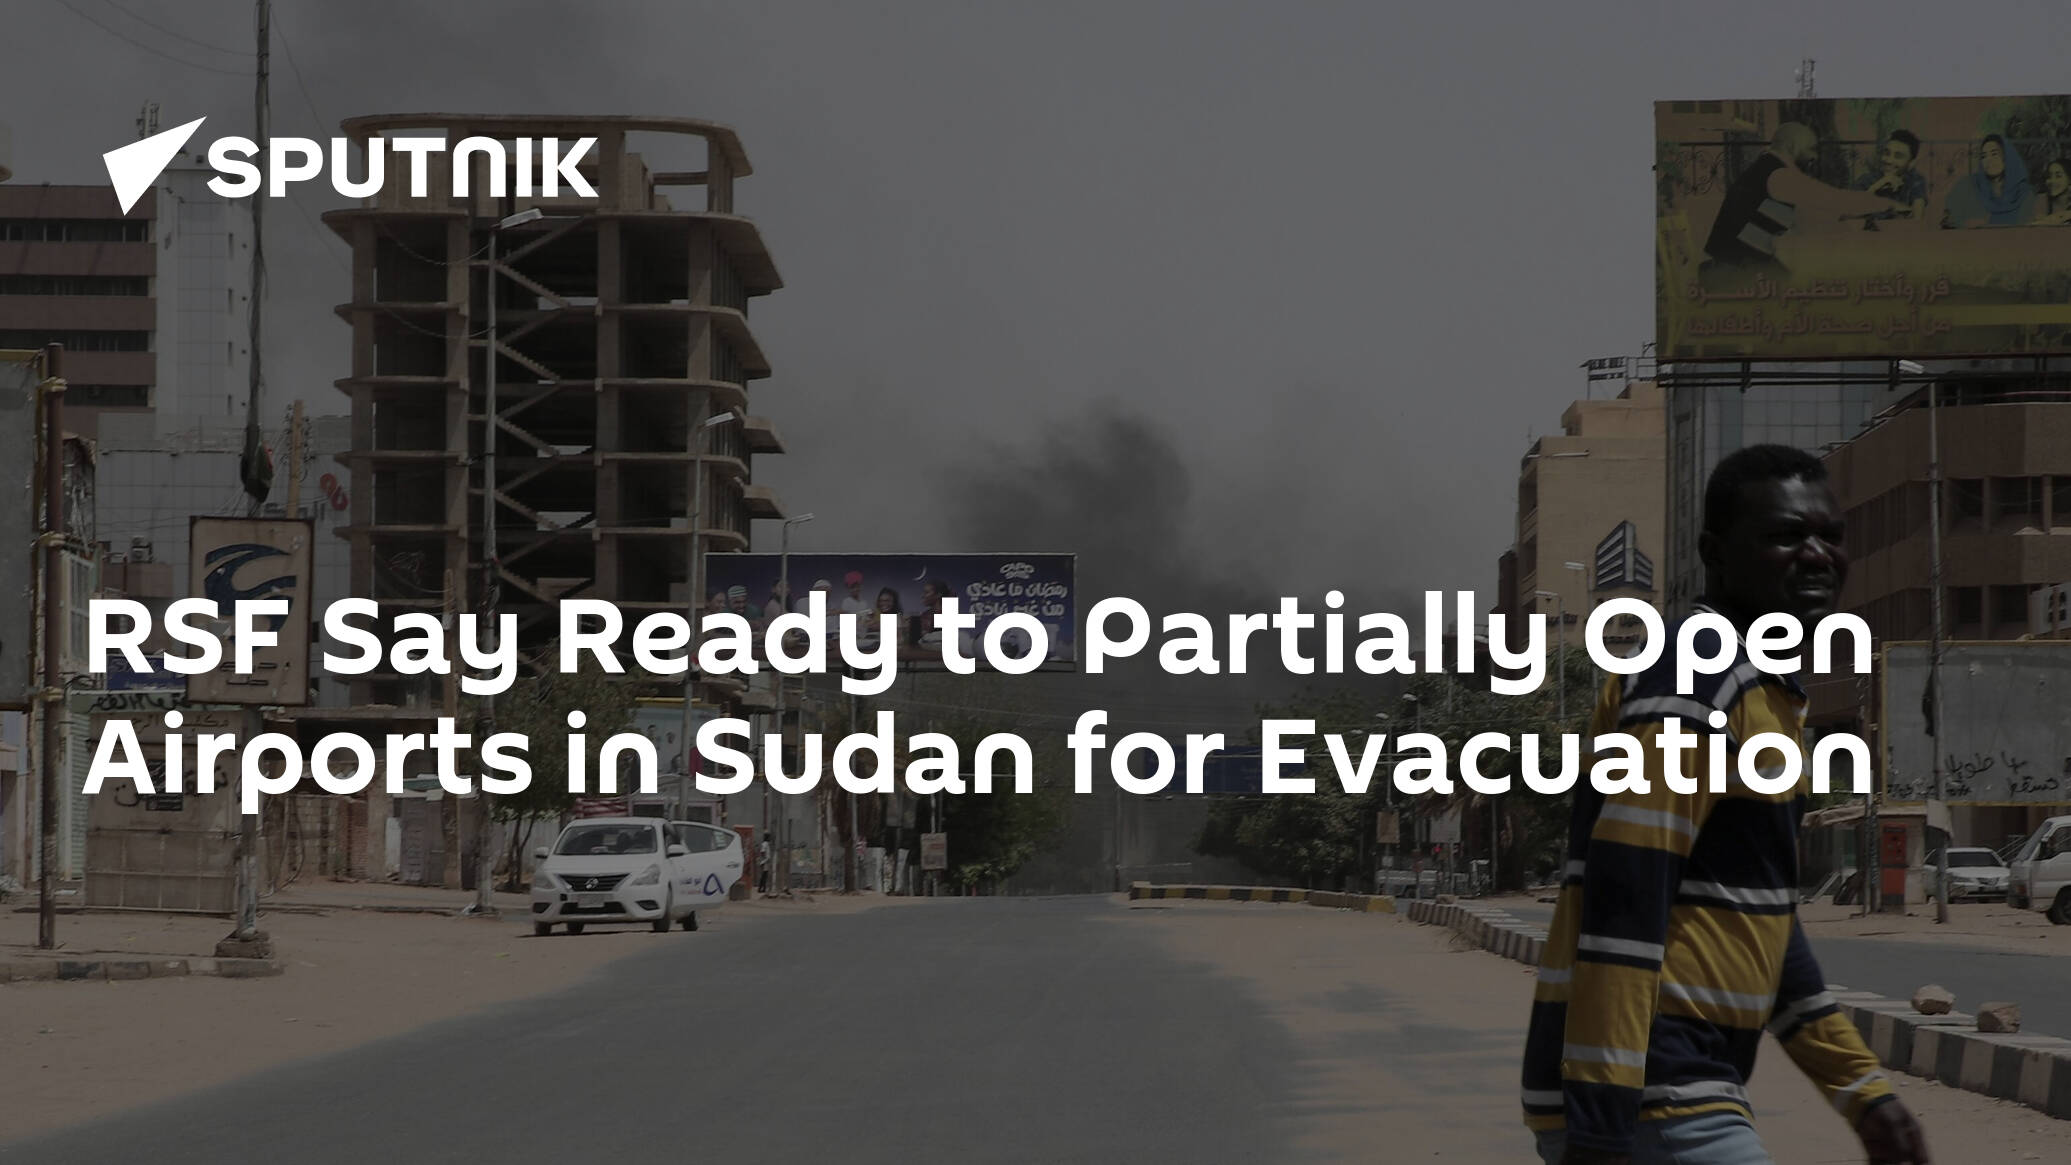 RSF Say Ready to Partially Open Airports in Sudan for Evacuation